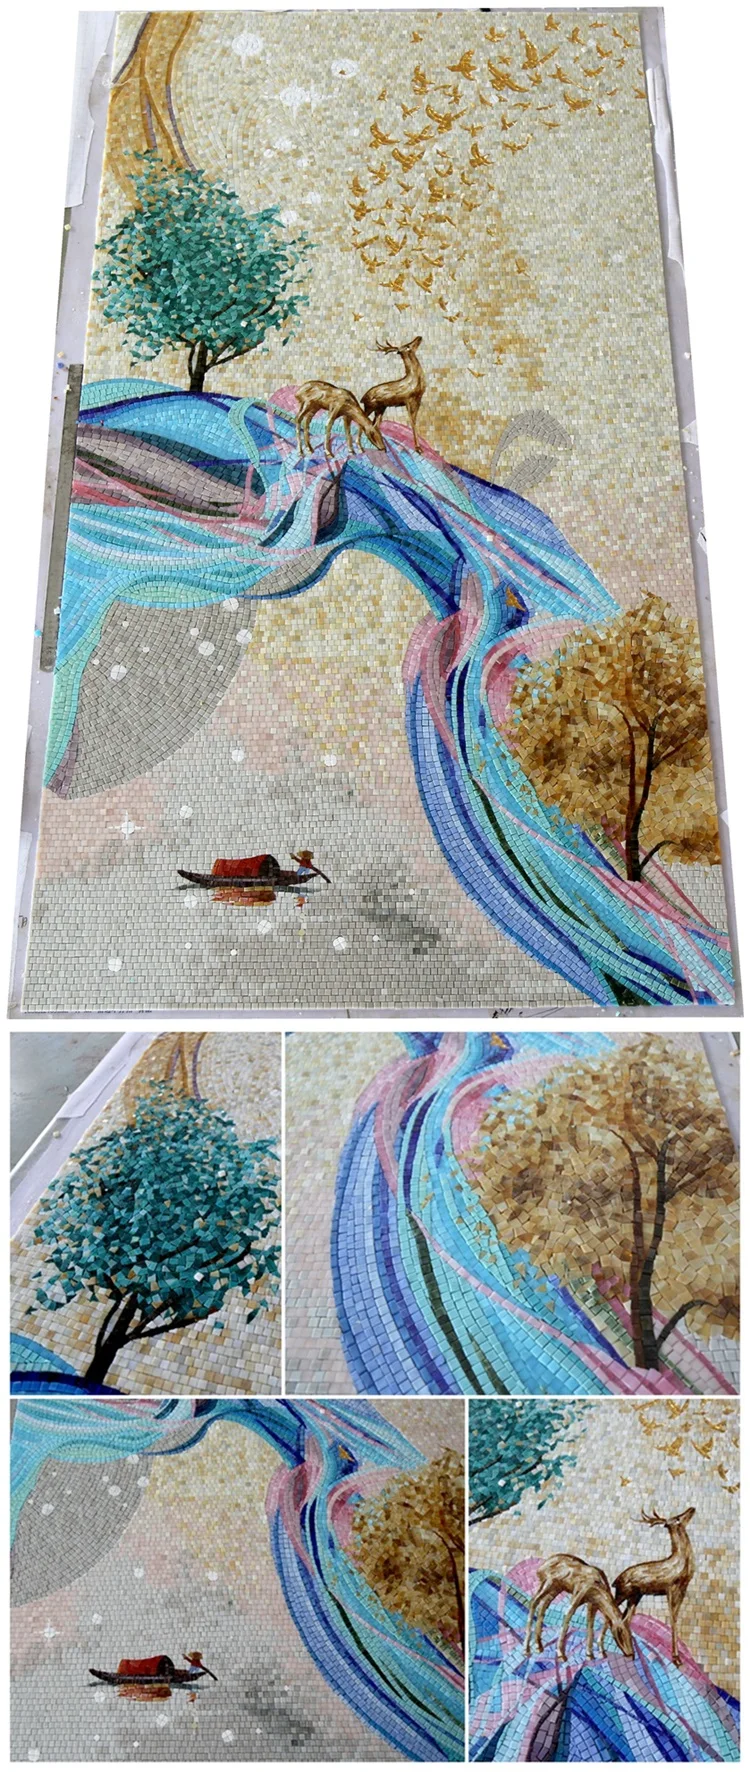 Chinese Supplier Glass Art Mosaic For Wall Decorative Exclusive Glass Art Mosaic Wall Tile